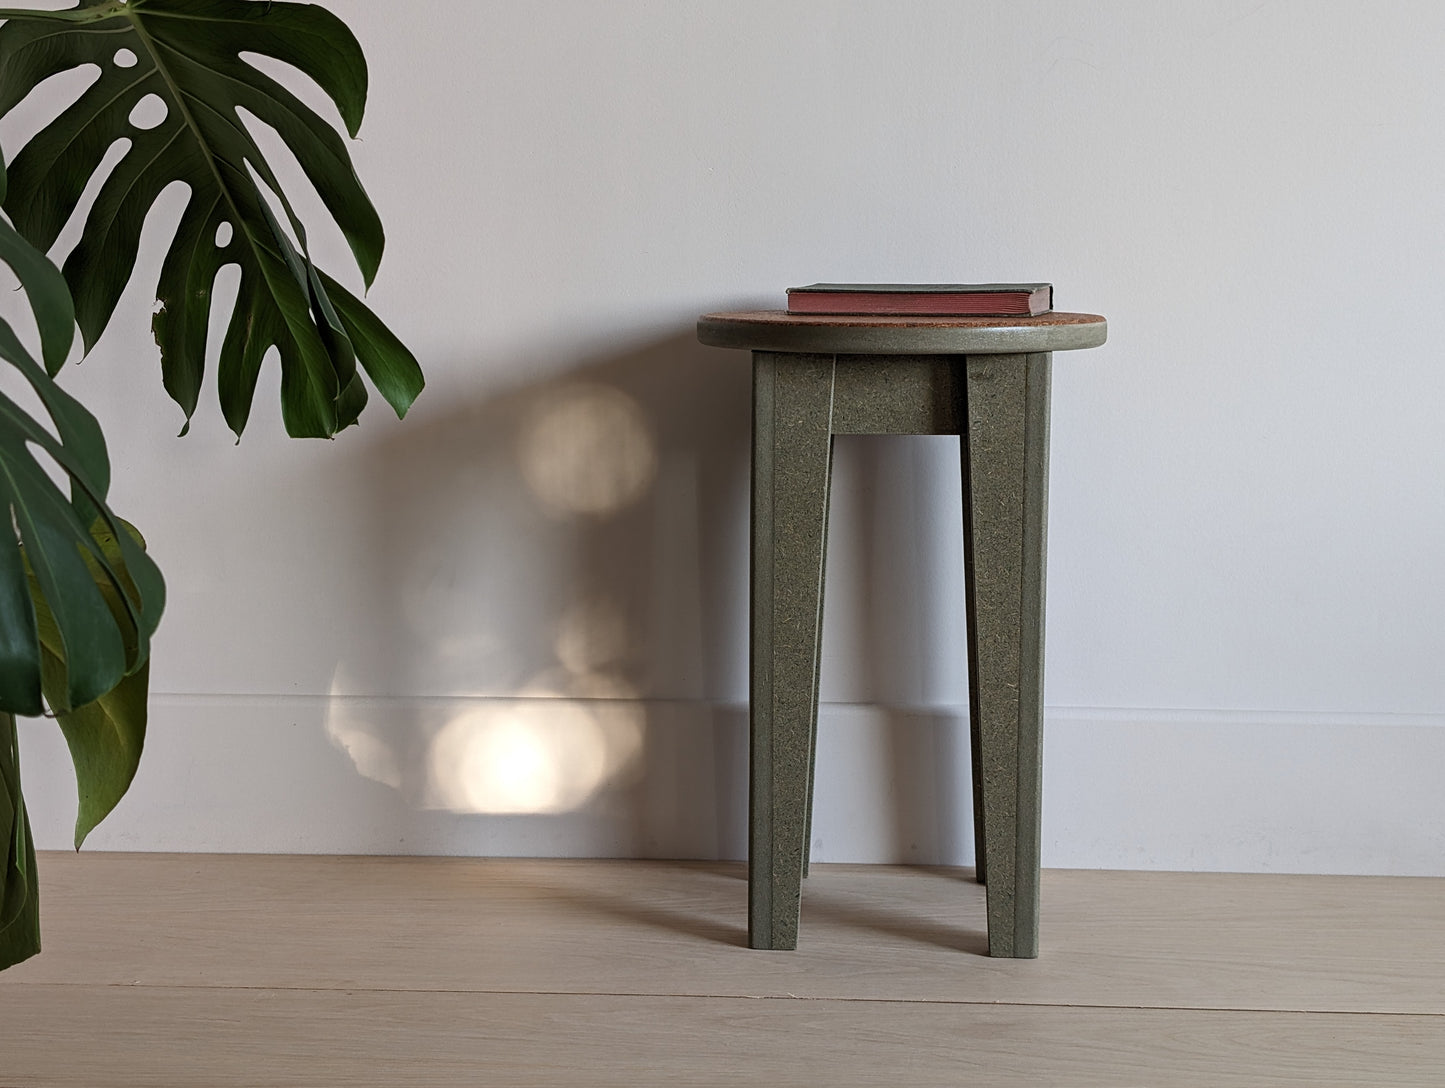 The stool in MDF